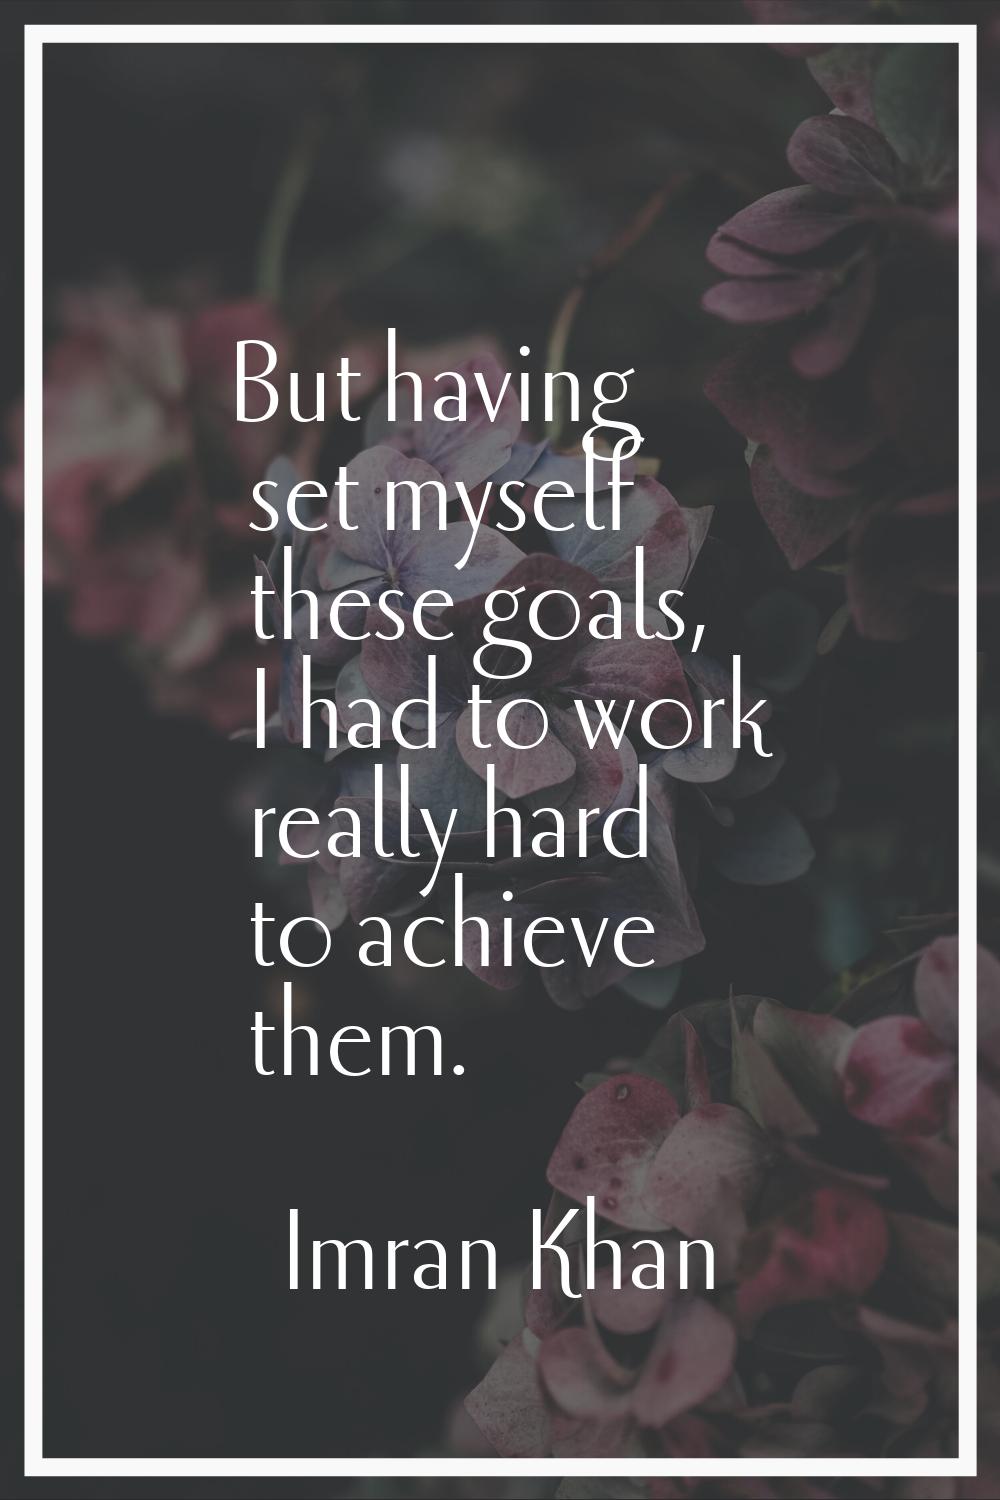 But having set myself these goals, I had to work really hard to achieve them.